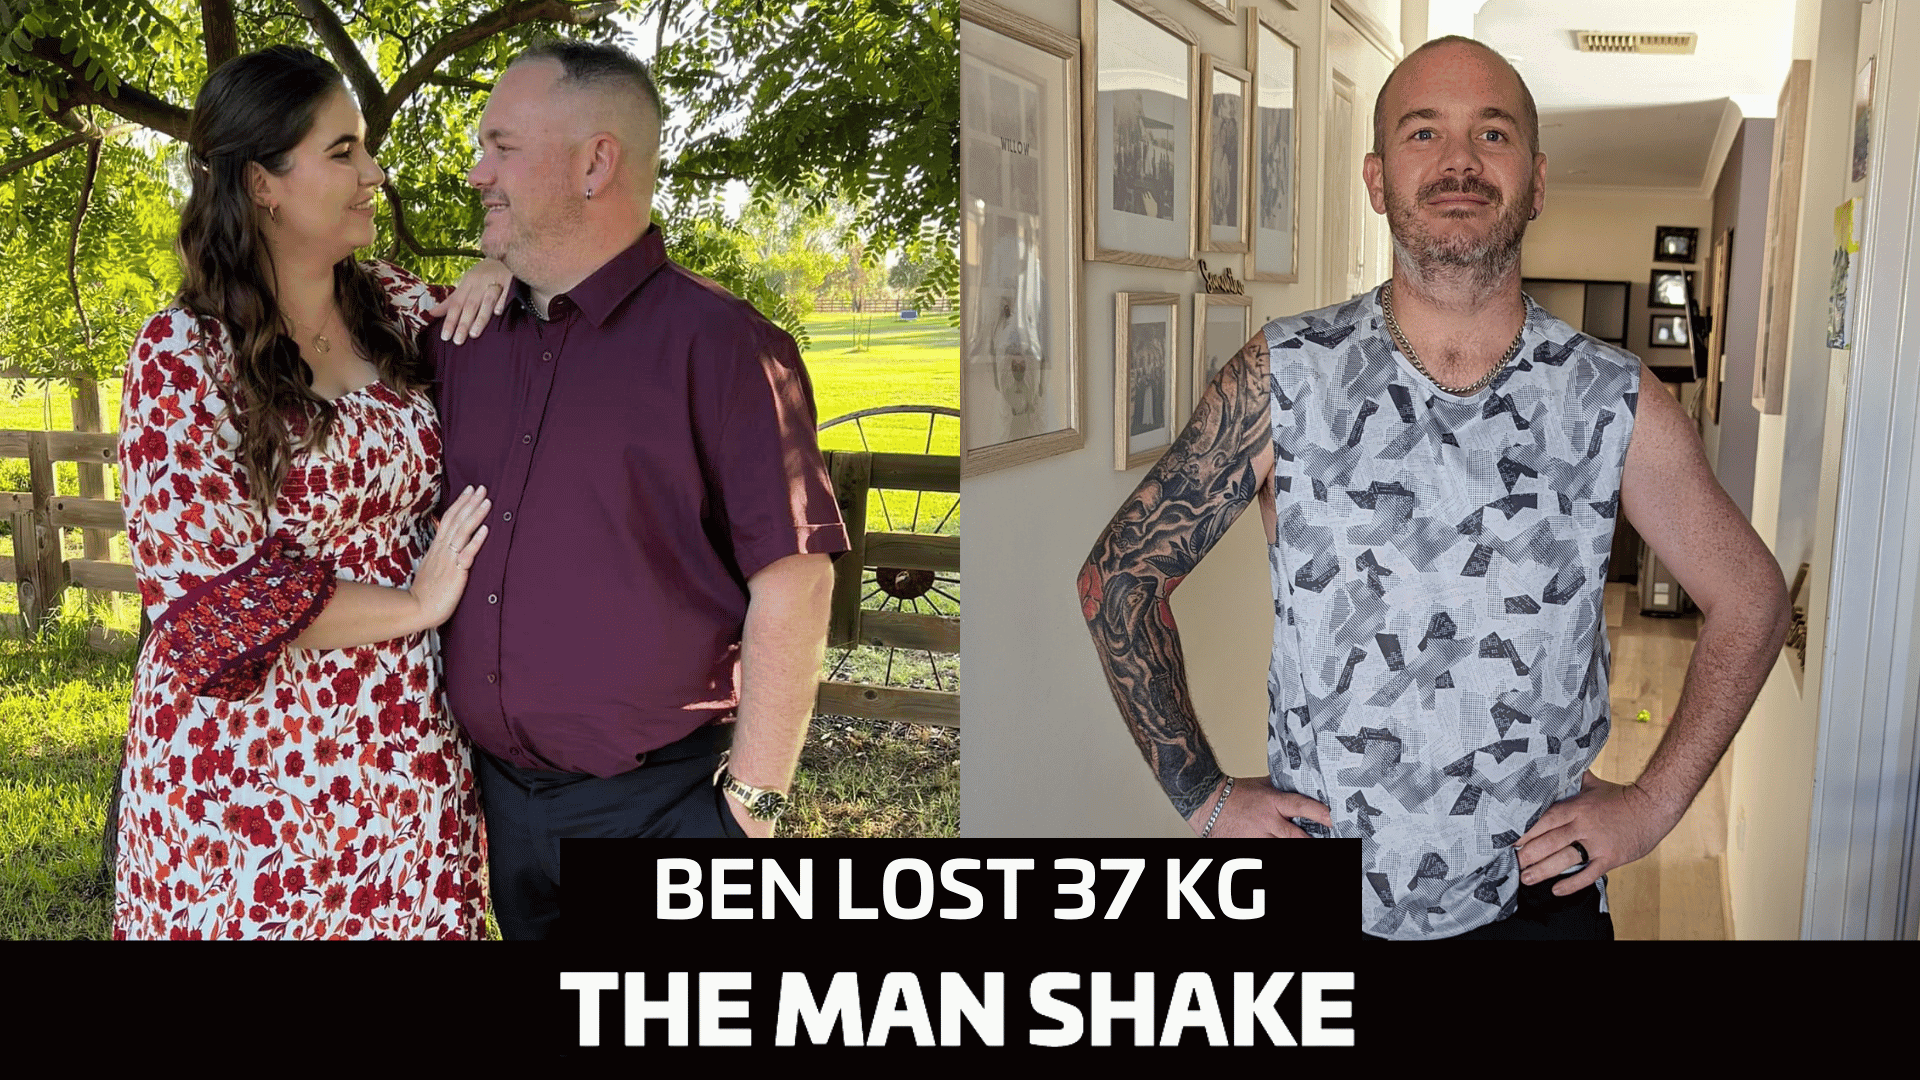 Ben wanted a new look, so he lost 37kgs!